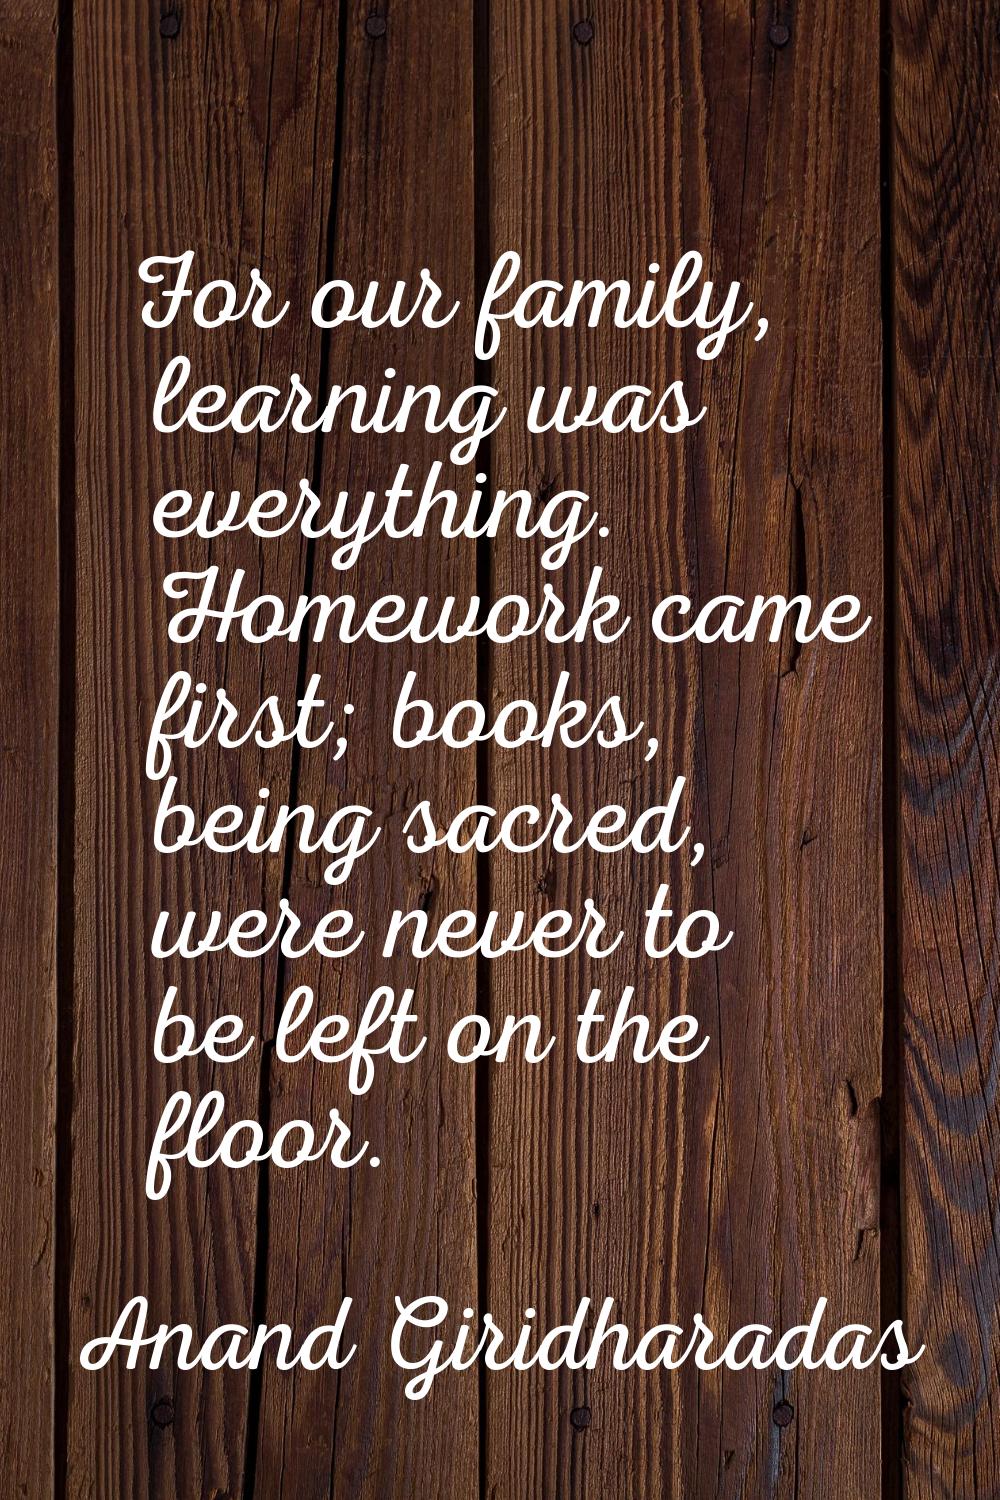 For our family, learning was everything. Homework came first; books, being sacred, were never to be